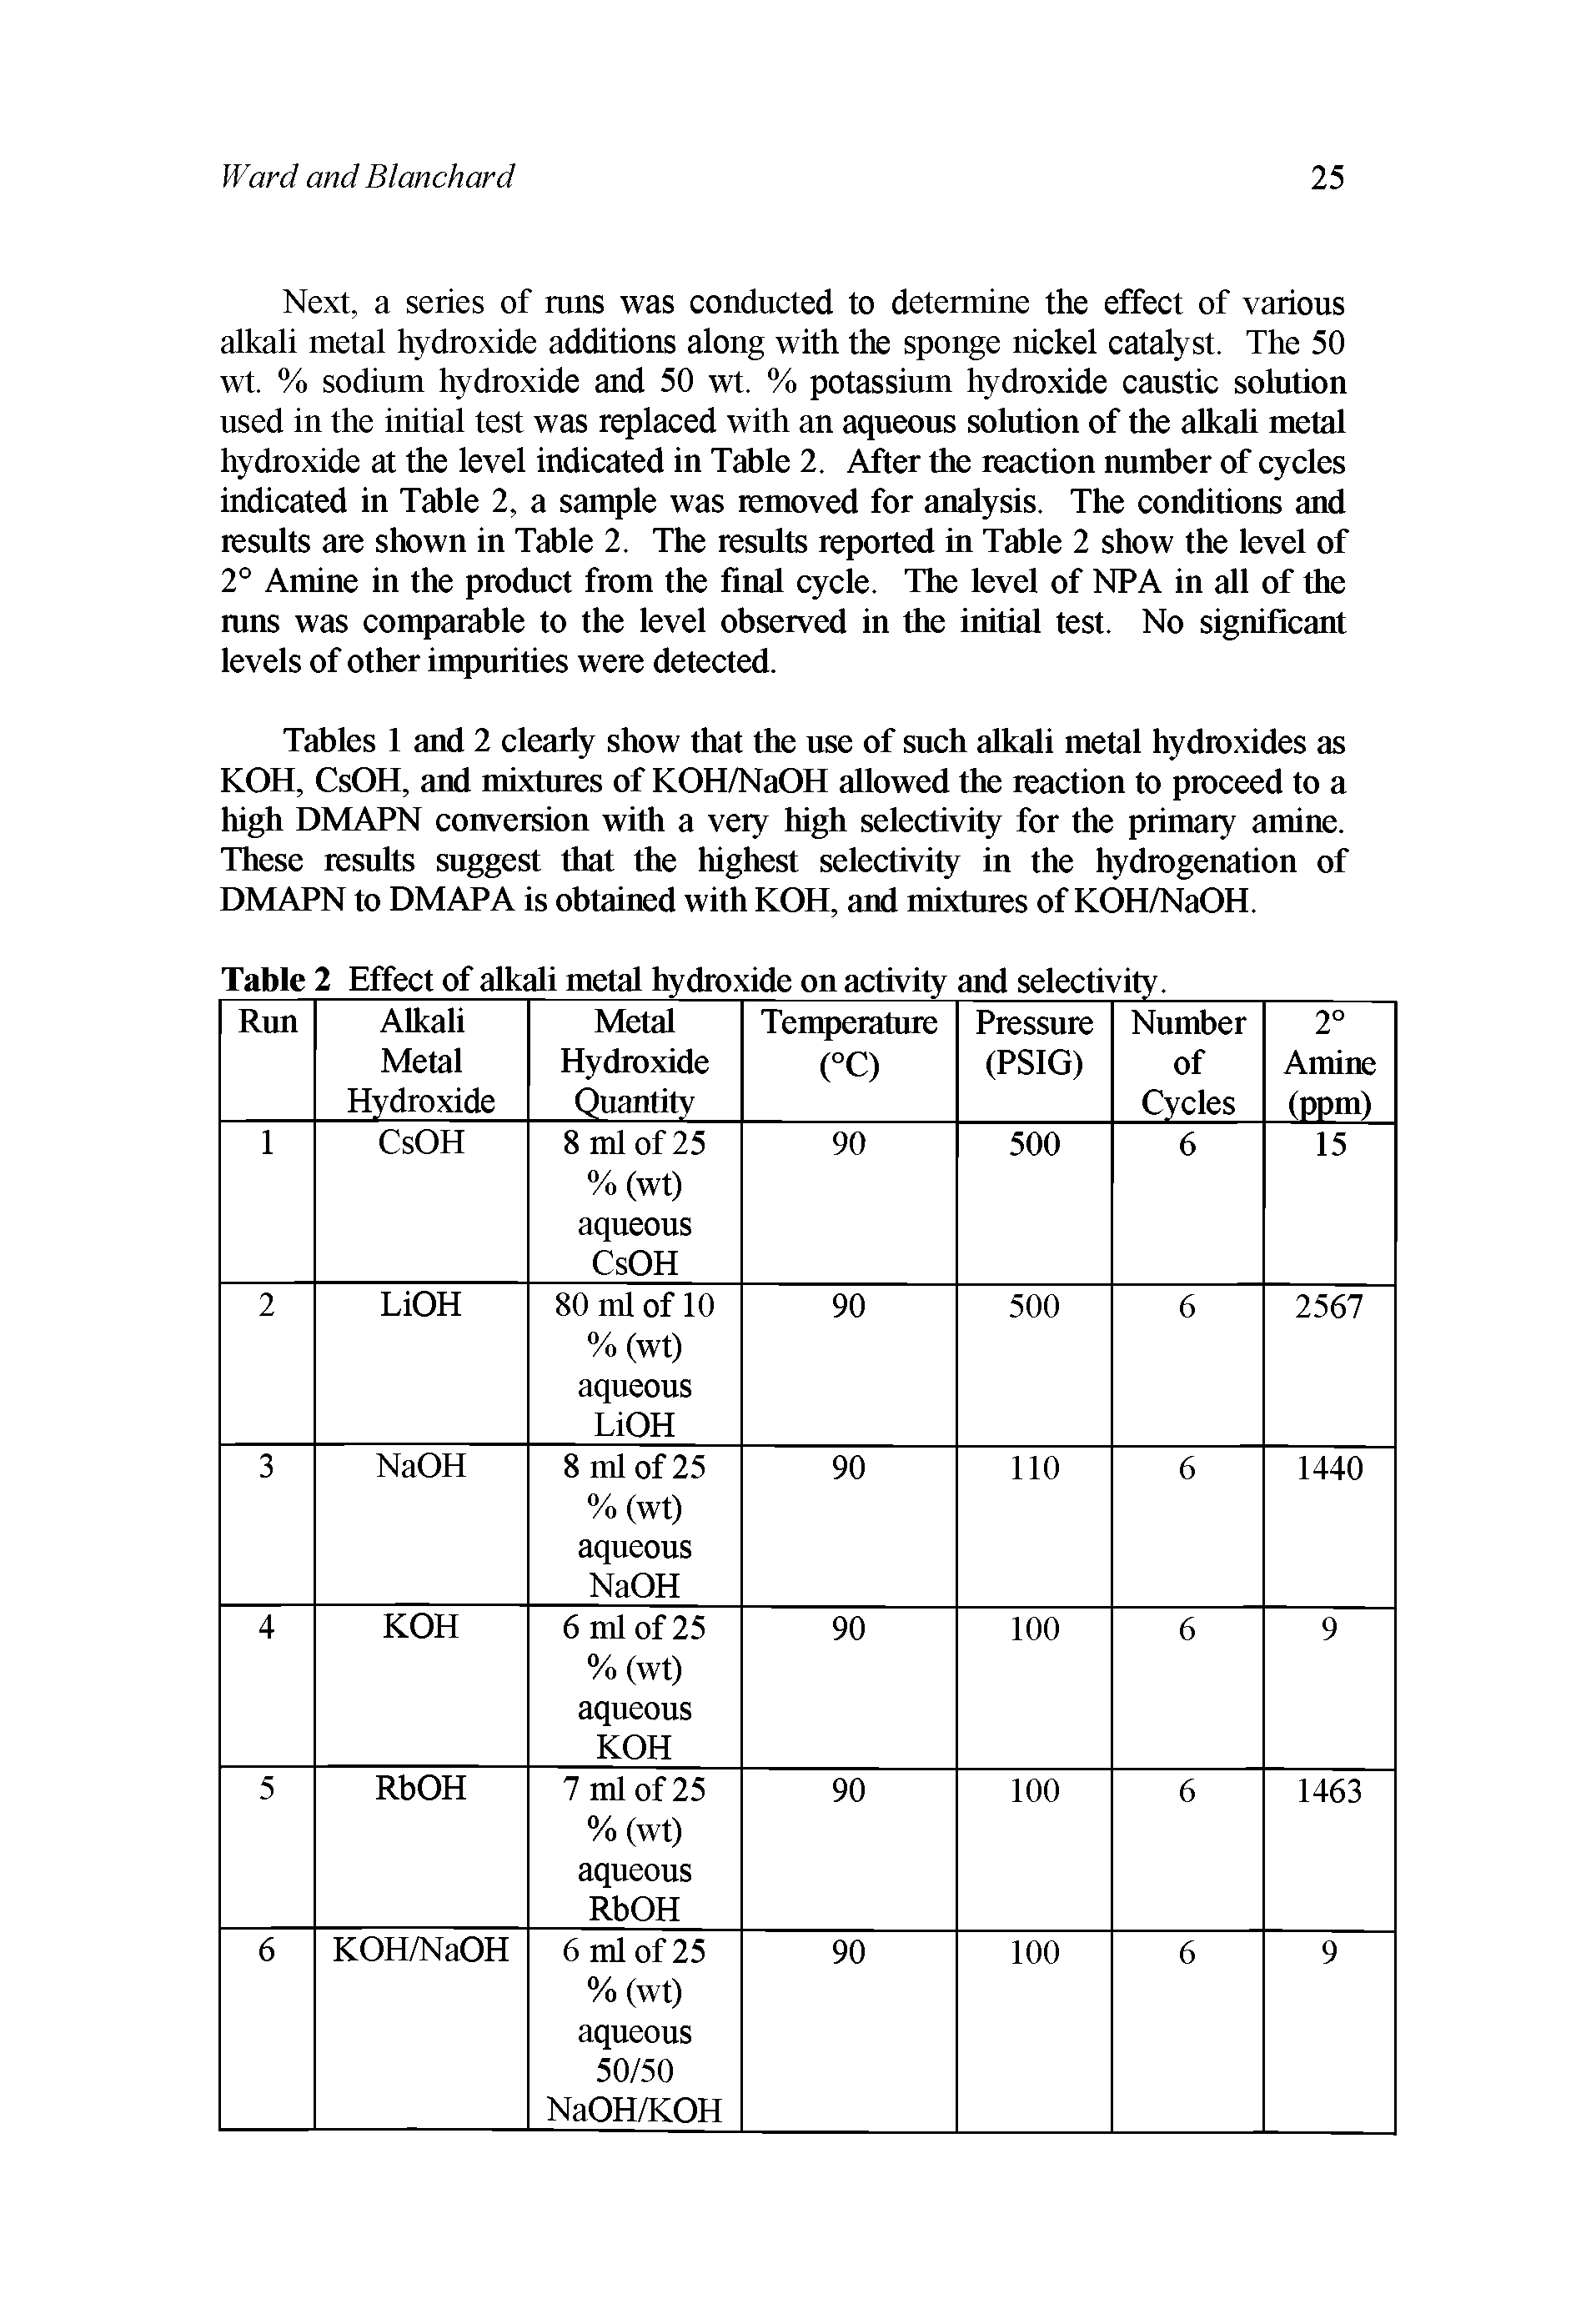 Tables 1 and 2 clearly show that the use of such alkali metal hydroxides as KOH, CsOH, and mixtures of KOH/NaOH allowed the reaction to proceed to a high DMAPN conversion with a very high selectivity for the primary amine. These results suggest that the highest selectivity in the hydrogenation of DMAPN to DMAPA is obtained with KOH, and mixtures of KOH/NaOH.